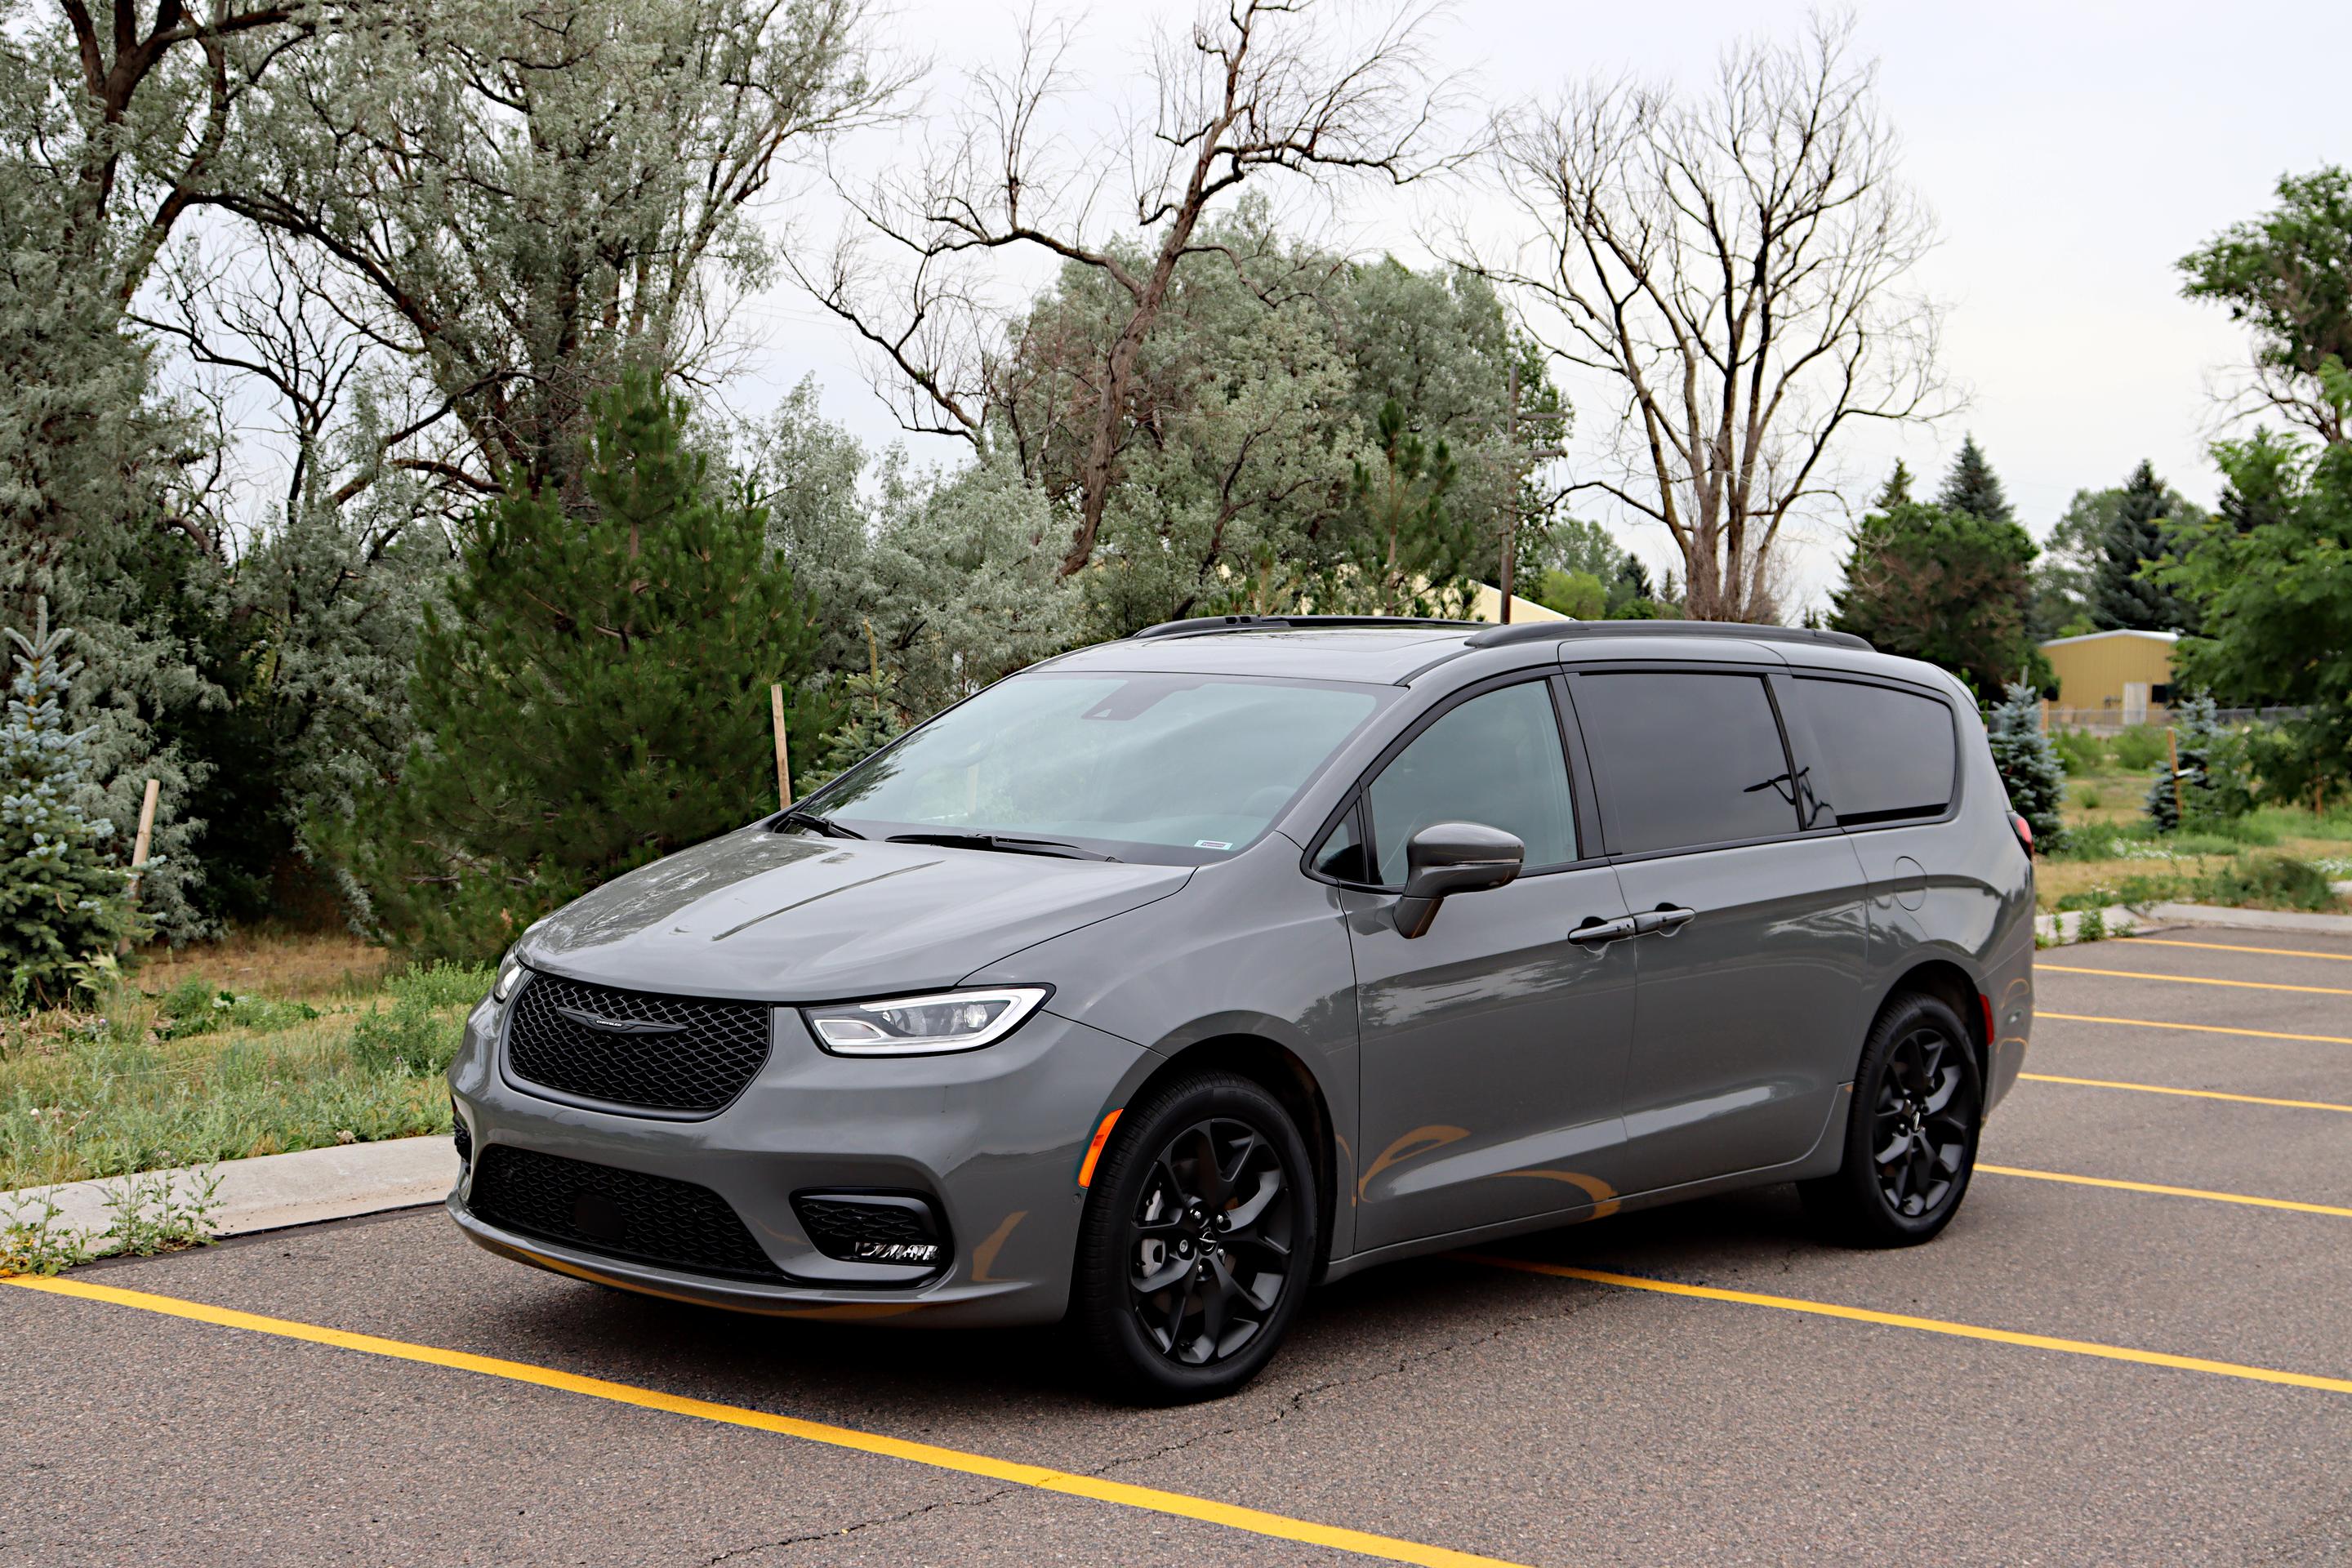 Review: 2022 Chrysler Pacifica is still the minivan benchmark